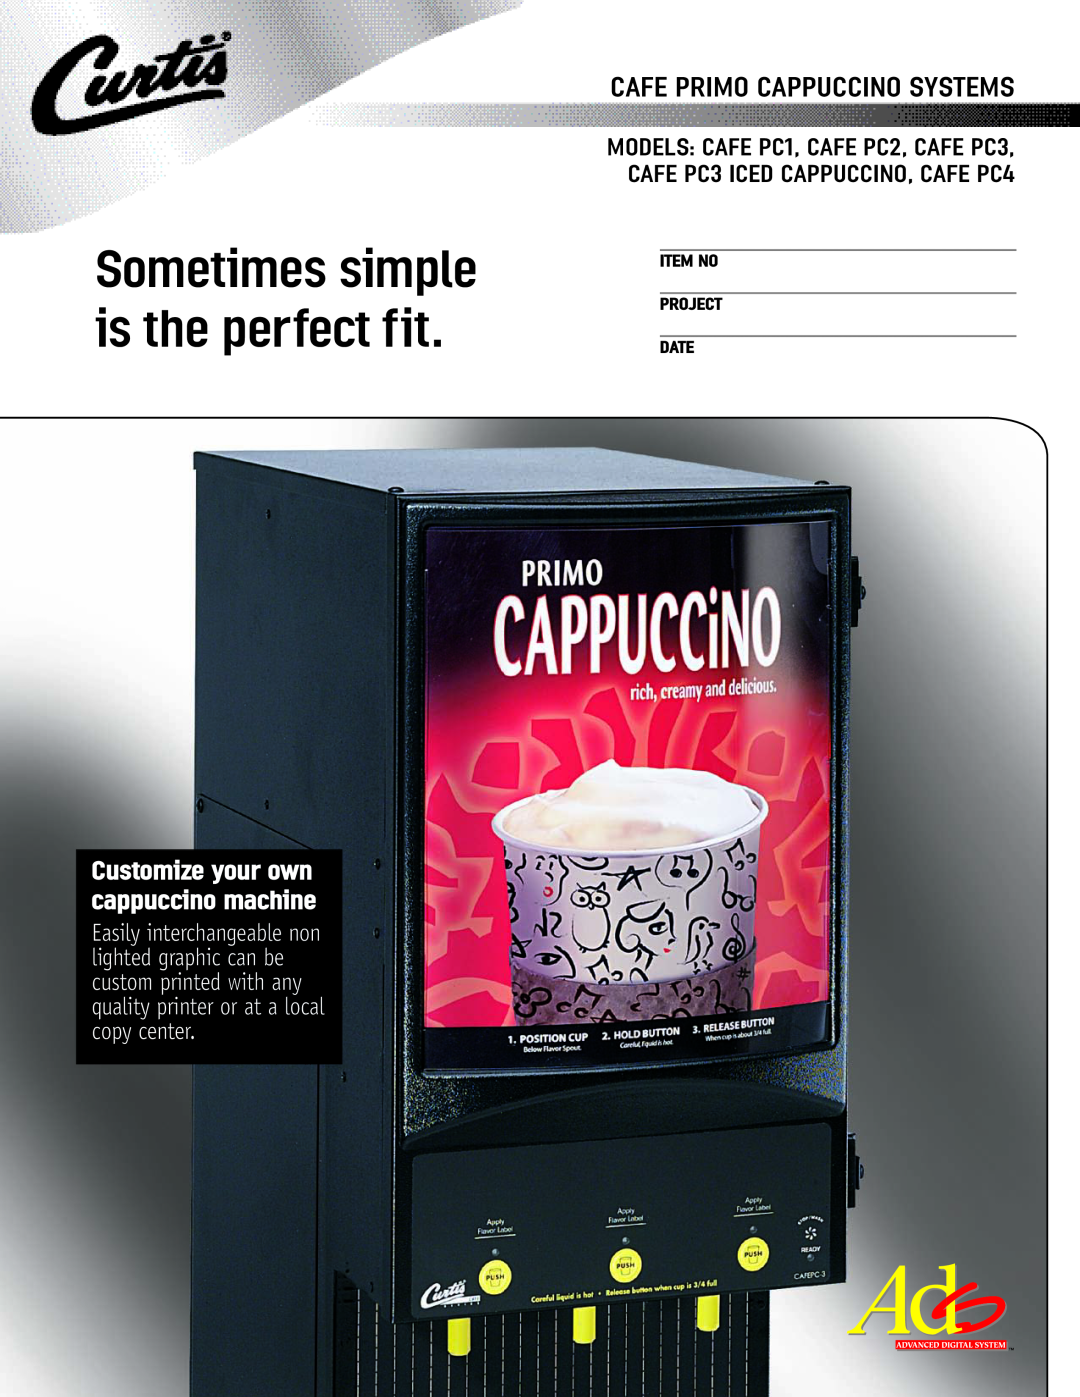 Curtis manual Sometimes simple is the perfect fit, Cafe Primo Cappuccino Systems, MODELS CAFE PC1, CAFE PC2, CAFE PC3 